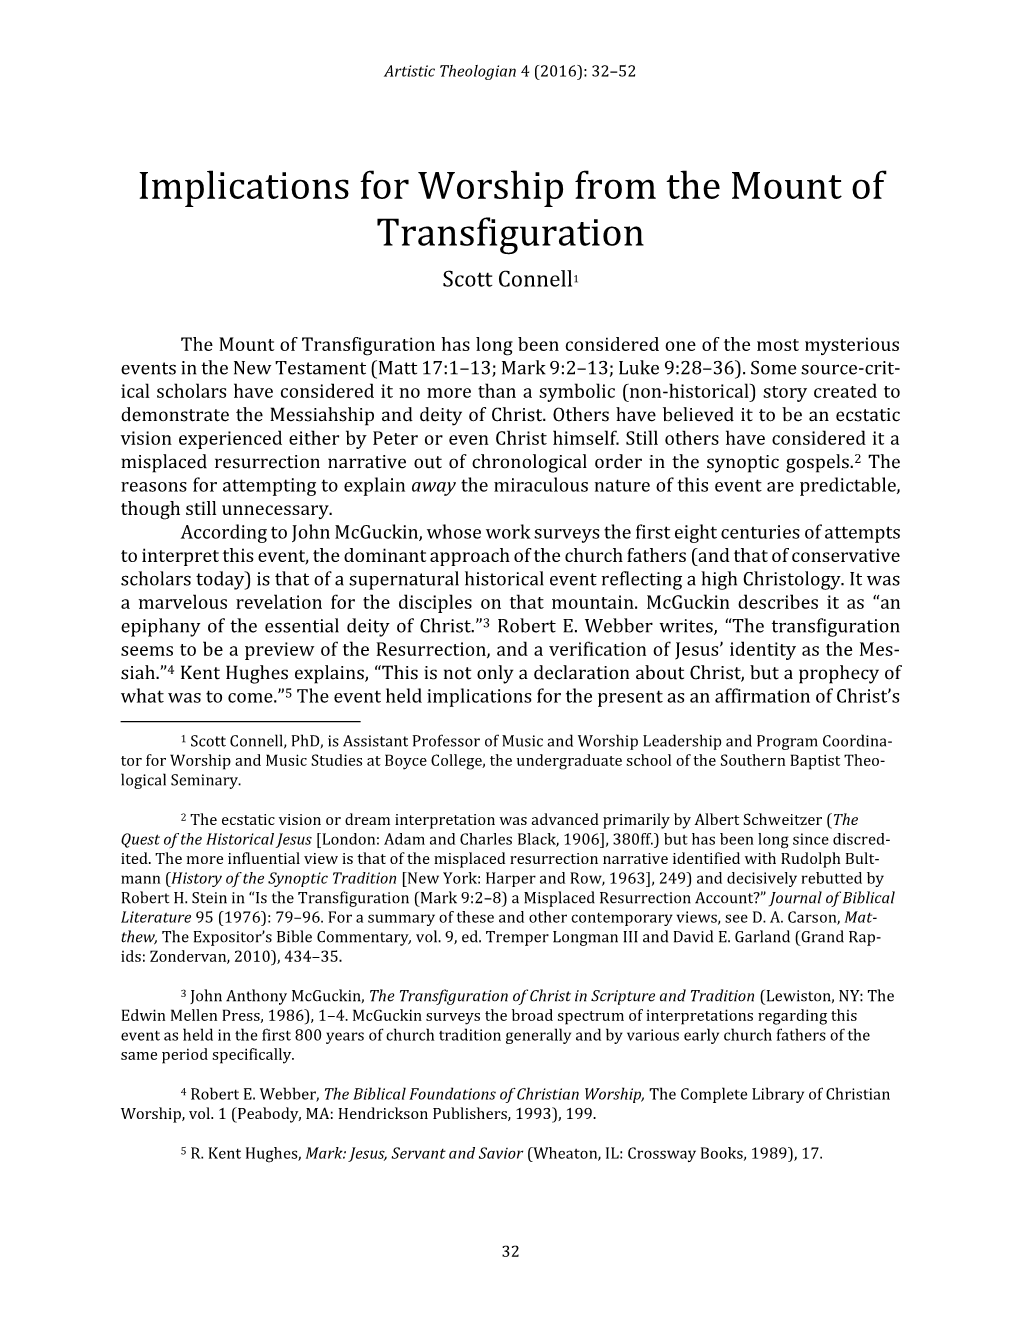 Implications for Worship from the Mount of Transfiguration